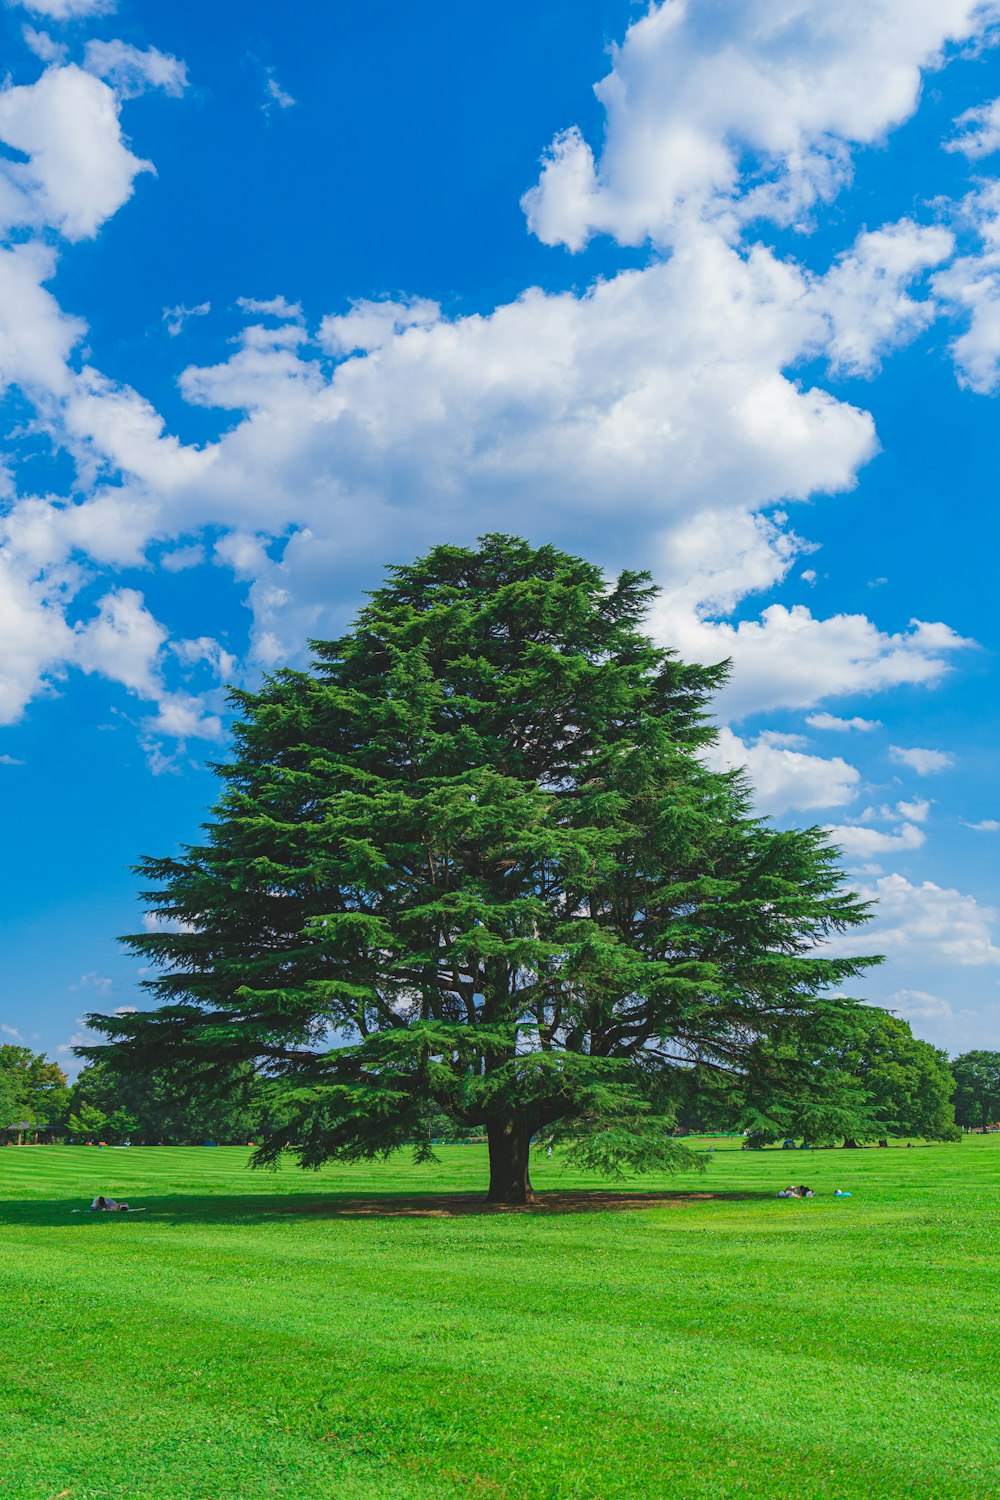 green tree on green grass field under blue and white cloudy sky during daytime